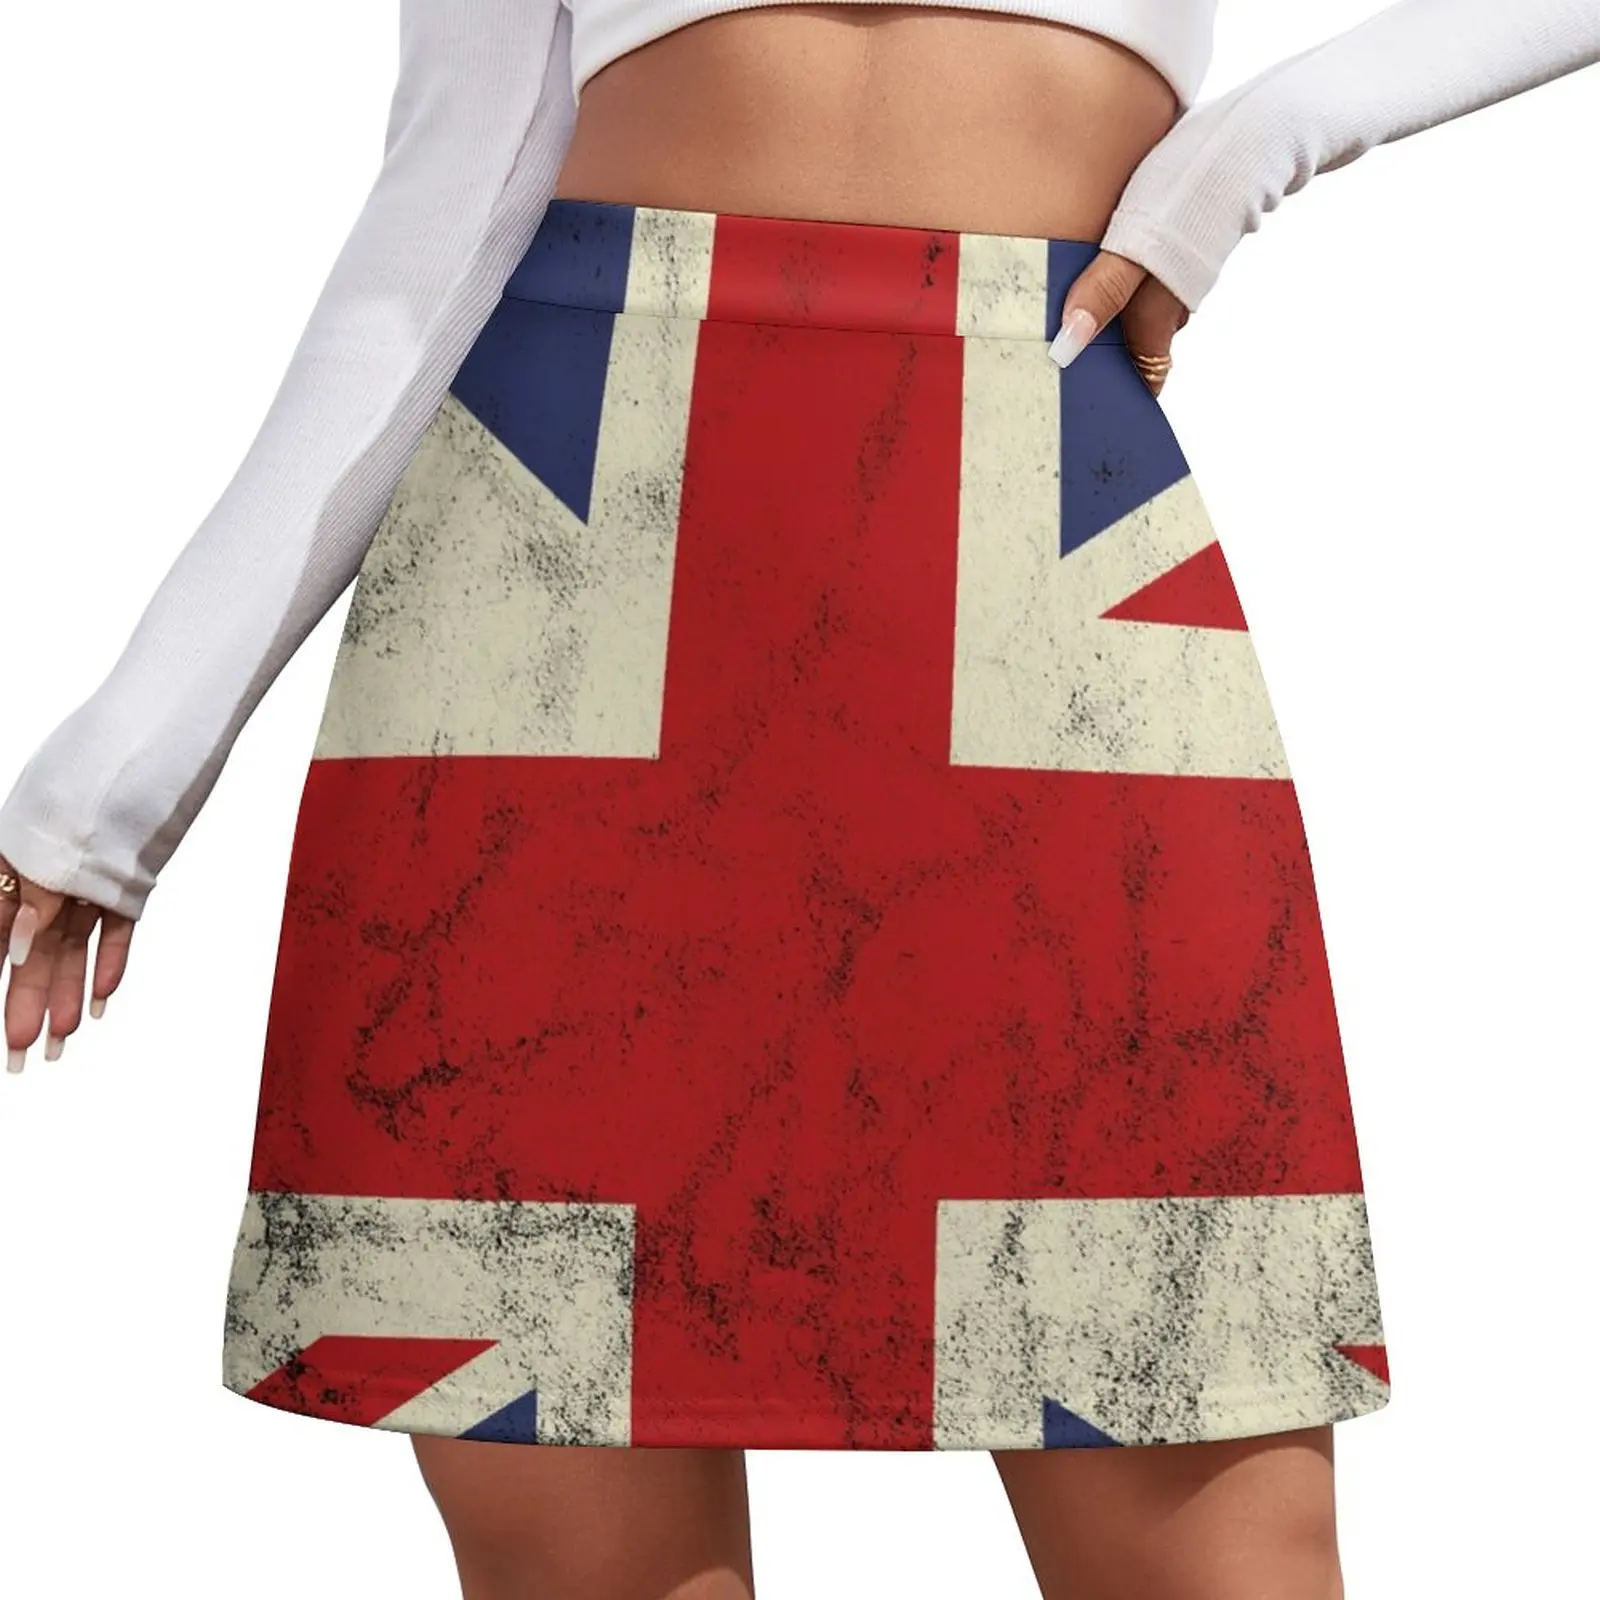 Union Jack with a worn / distressed look Mini Skirt women's skirts trend 2024 Skirt satin fairy core